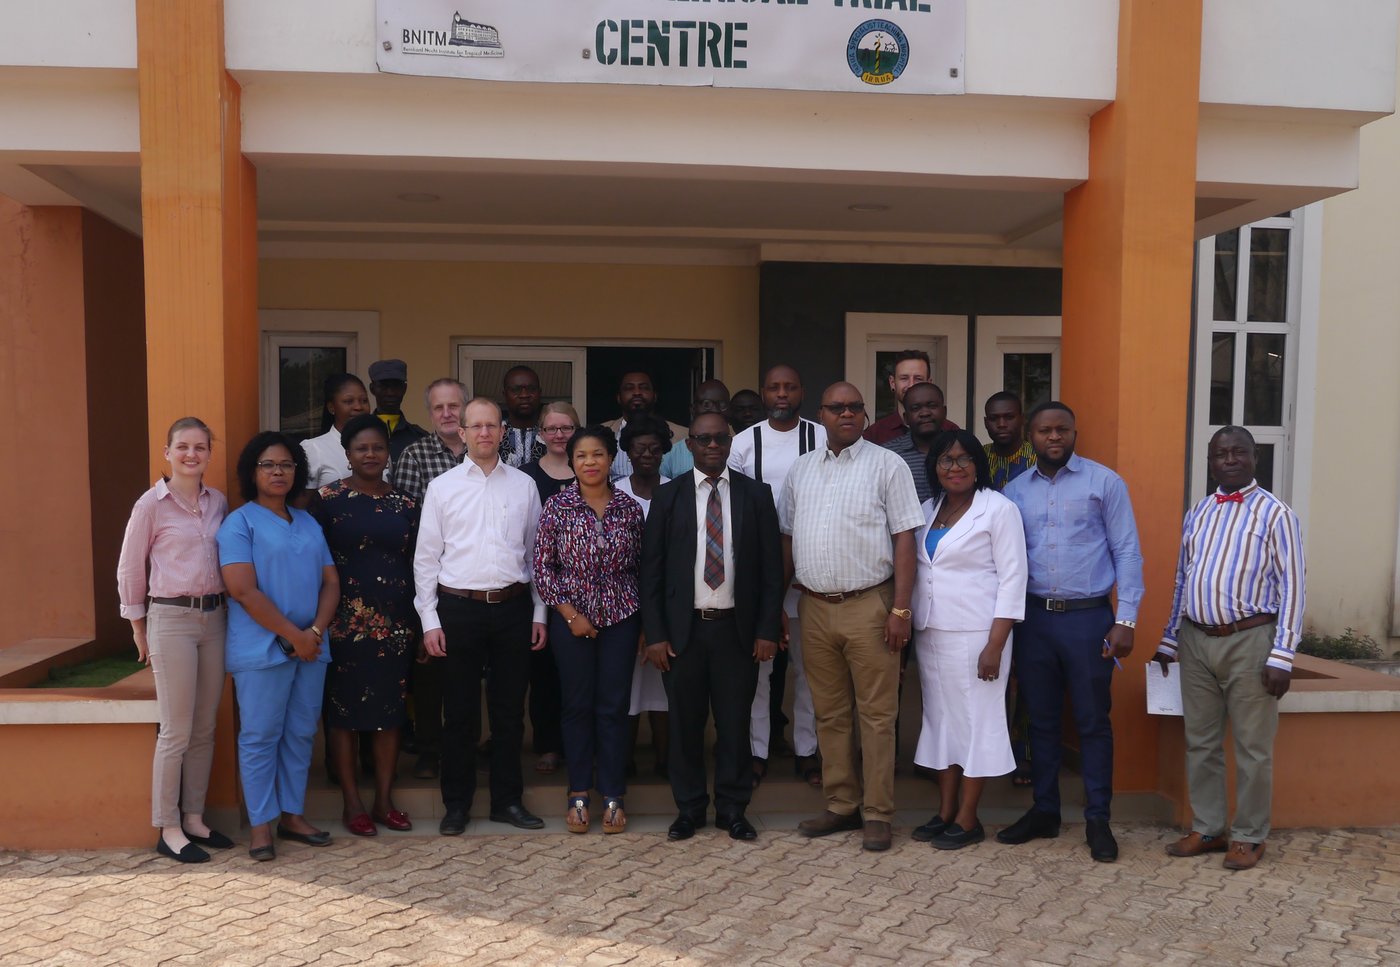 The picture shows a group of international researchers in front of the entrance to the ISTH in Nigeria.